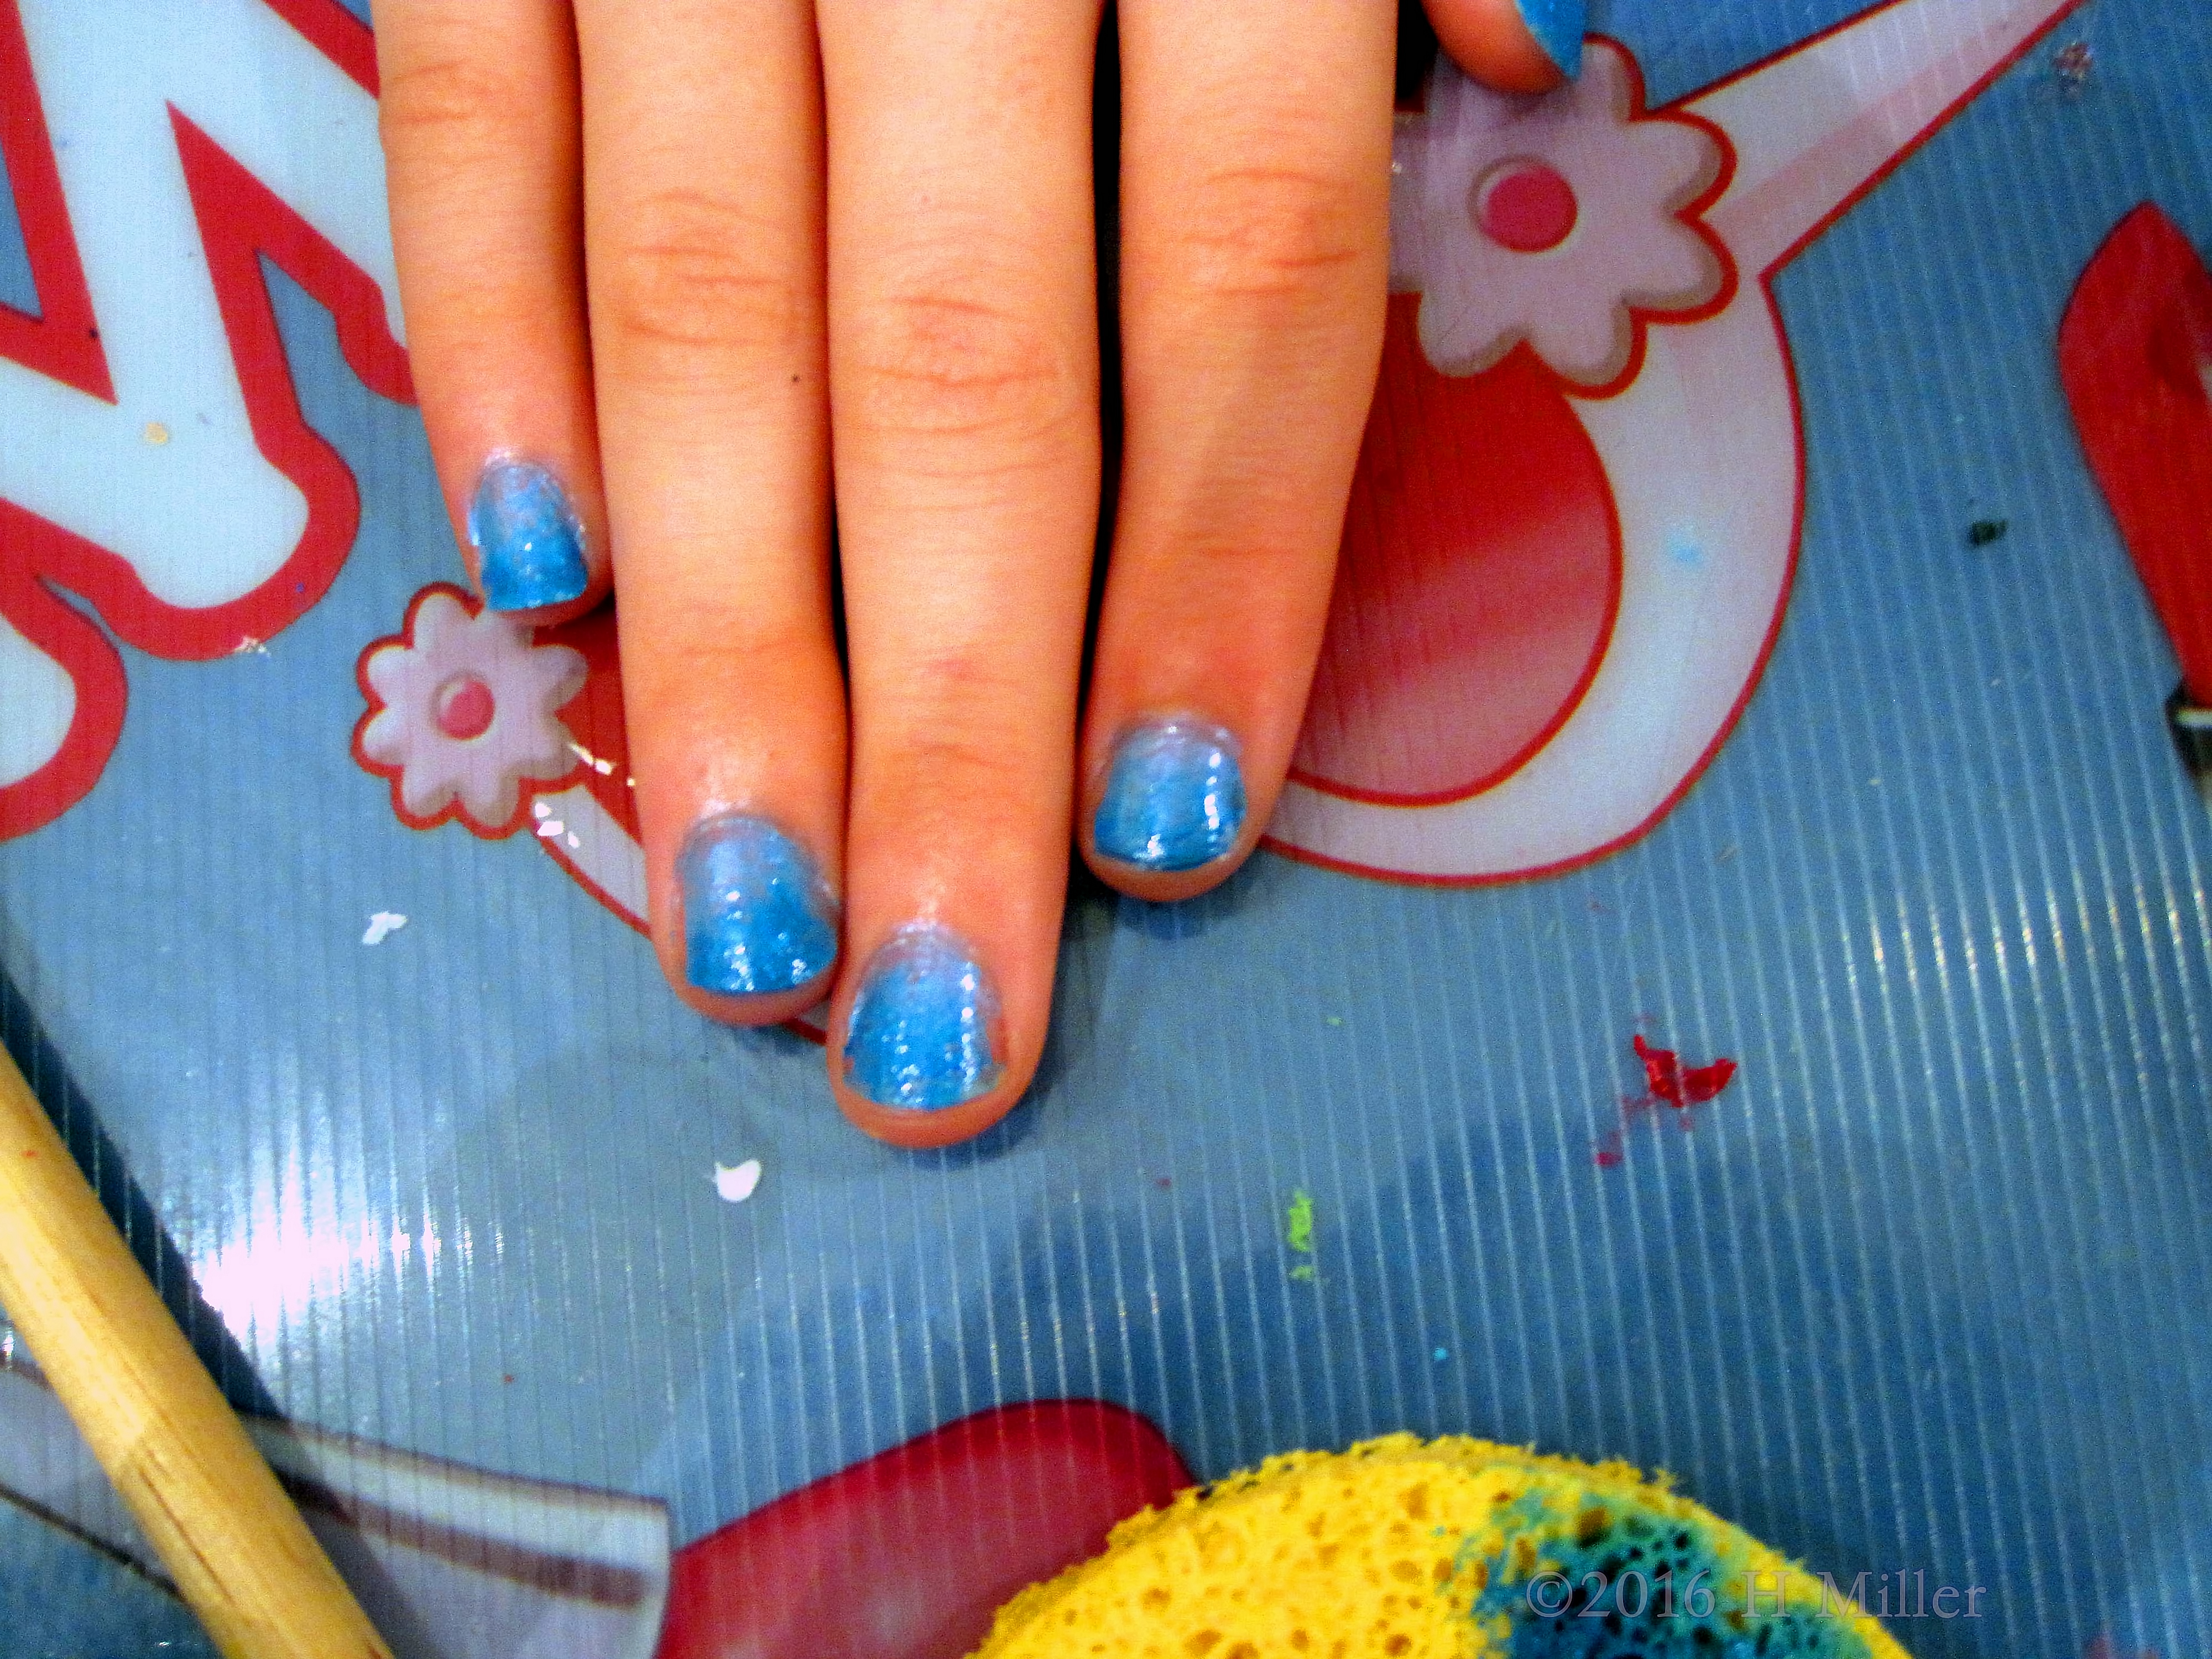 Have A Look At This Glittery Mini Mani! 